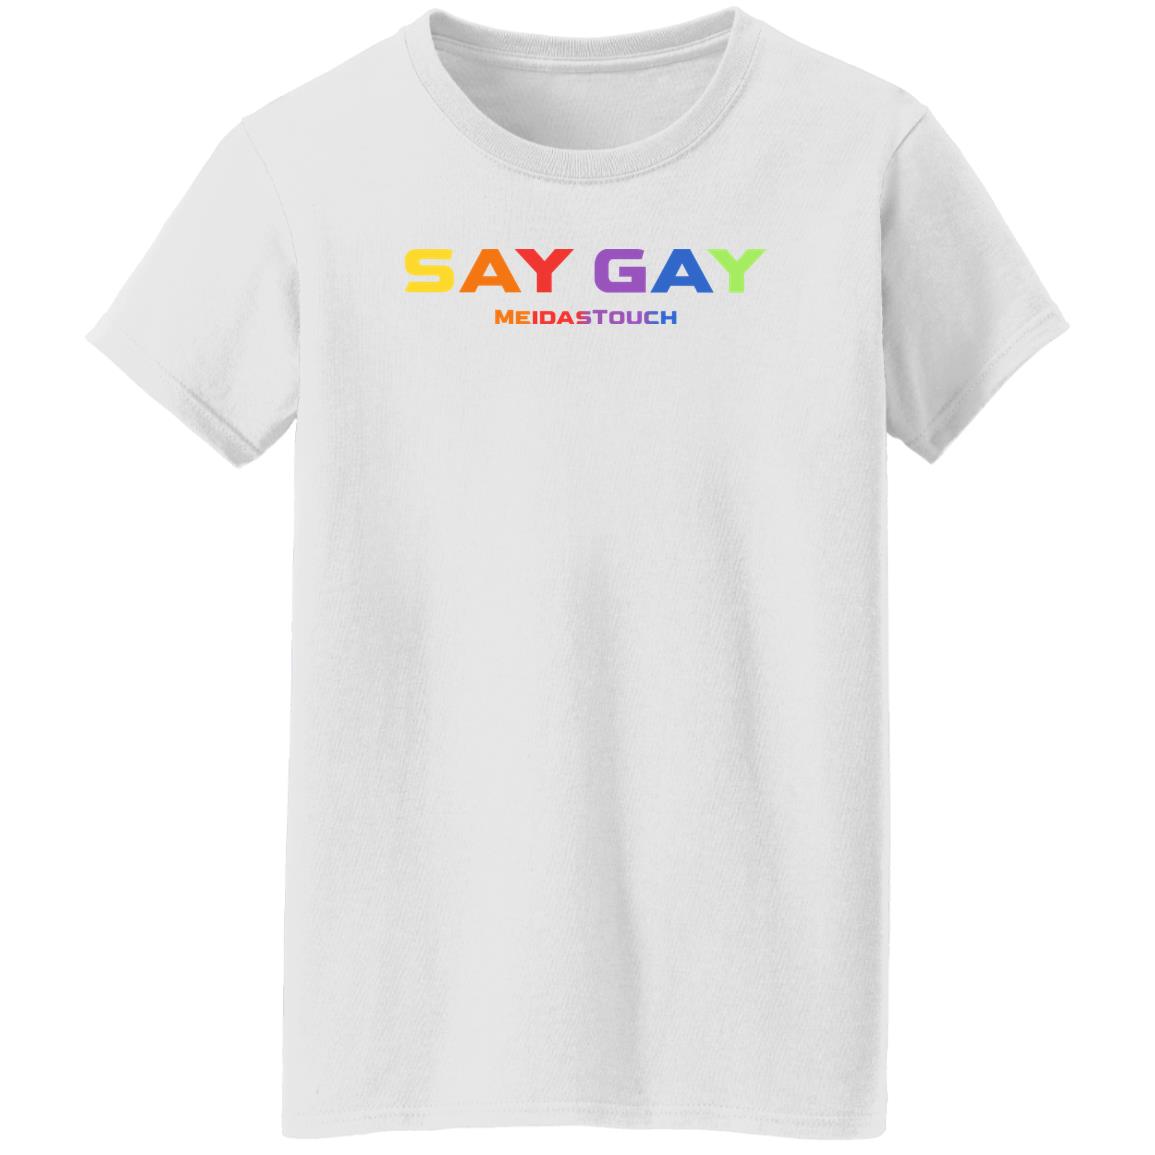 Meidastouch Store Say Gay Meidastouch Shirt Texas Paul